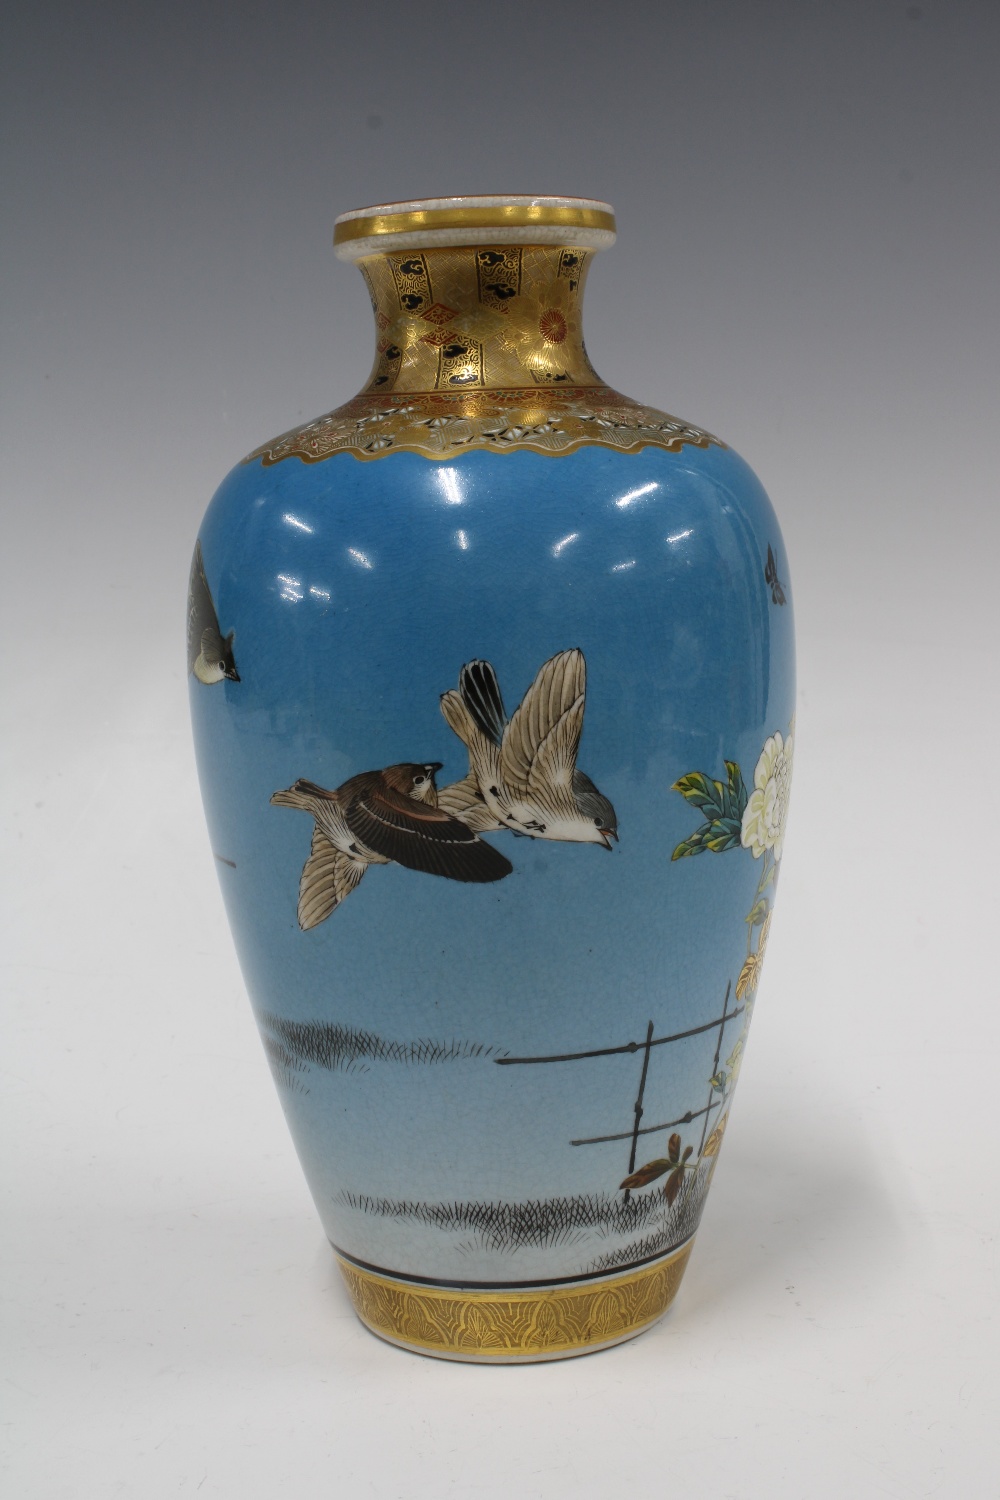 Japanese earthenware baluster vase, turquoise glazed ground and decorated with a pattern of birds, - Image 2 of 3